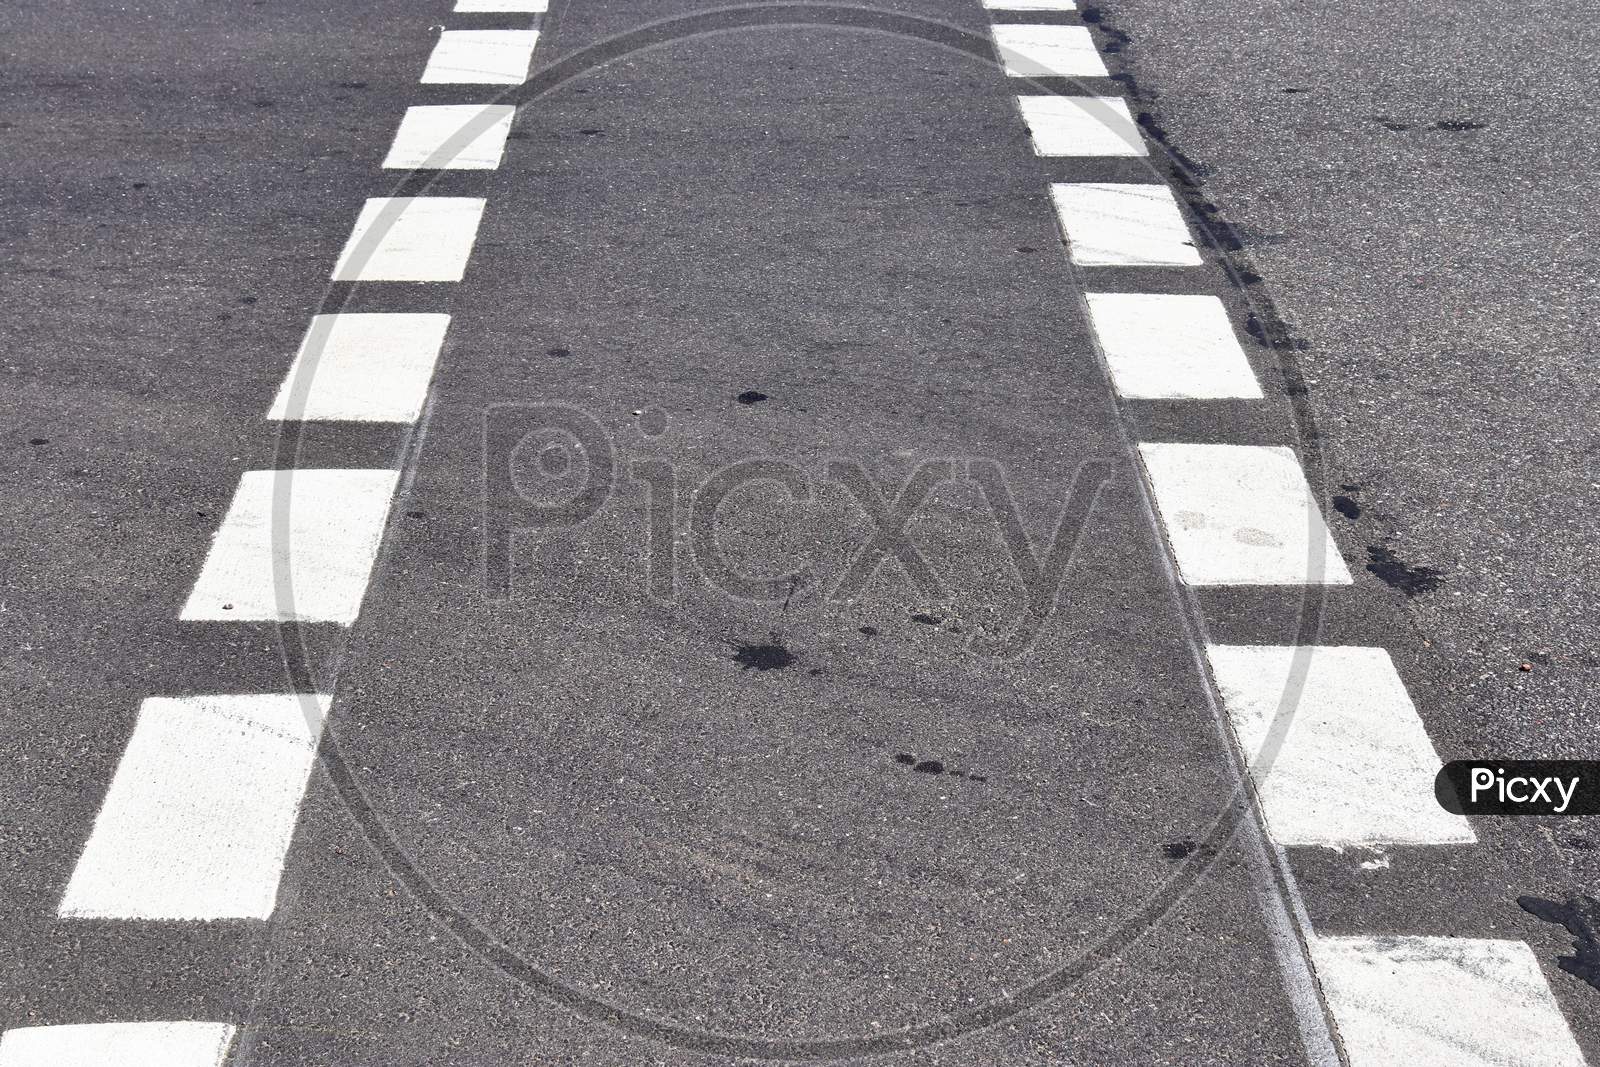 White lines and symbols on the asphalt of roads all over the world